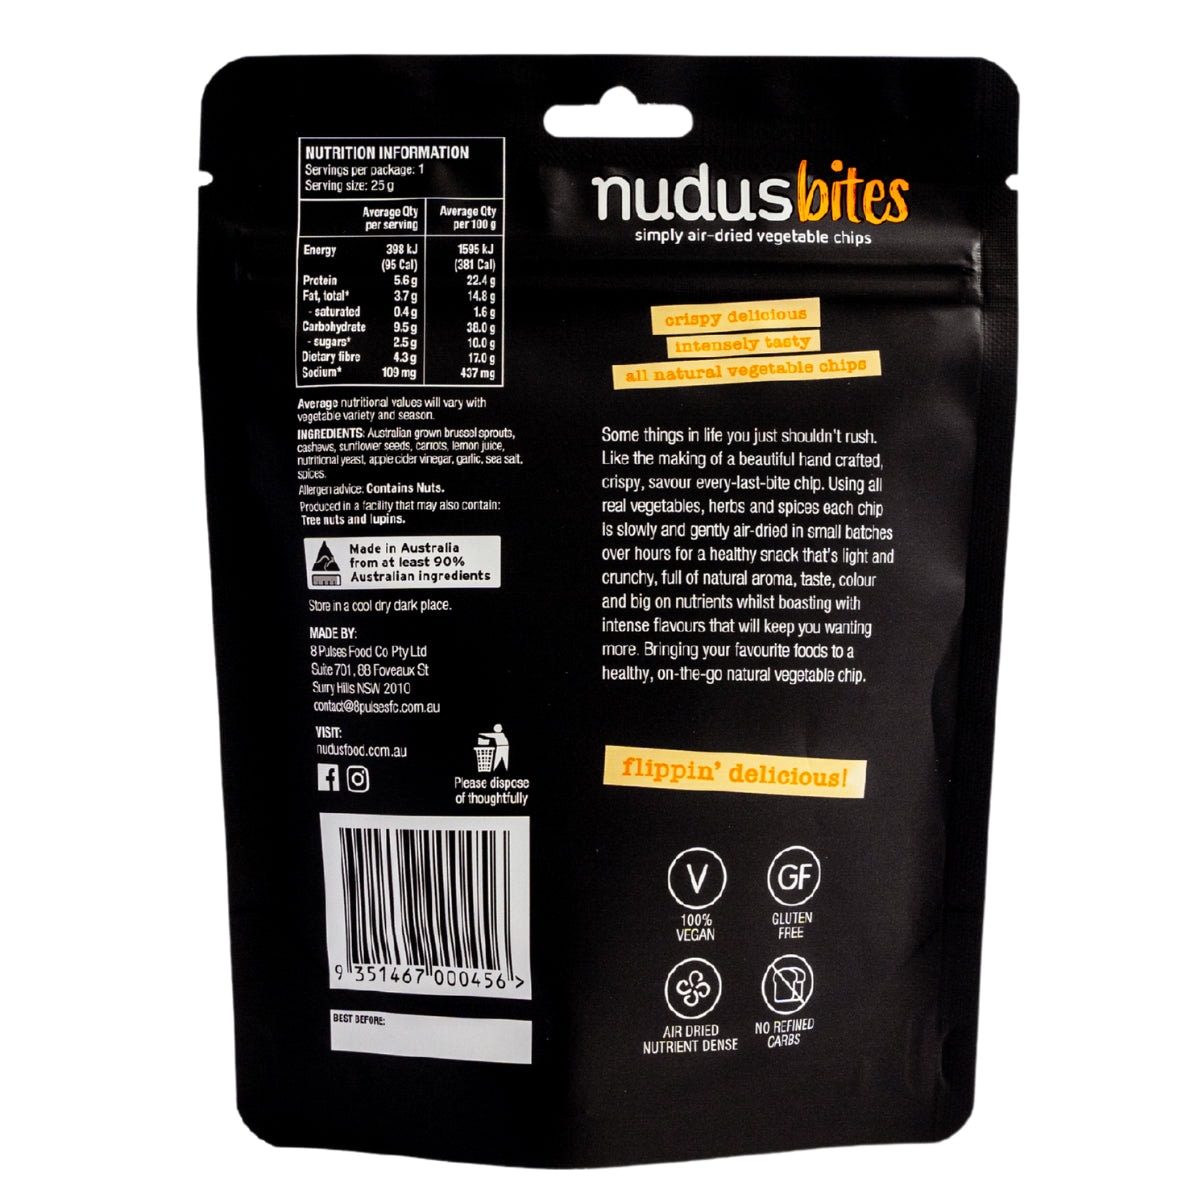 Nudus Bites Air-Dried Brussel Sprout Cheeky Cheesy Vegan Chips 25g